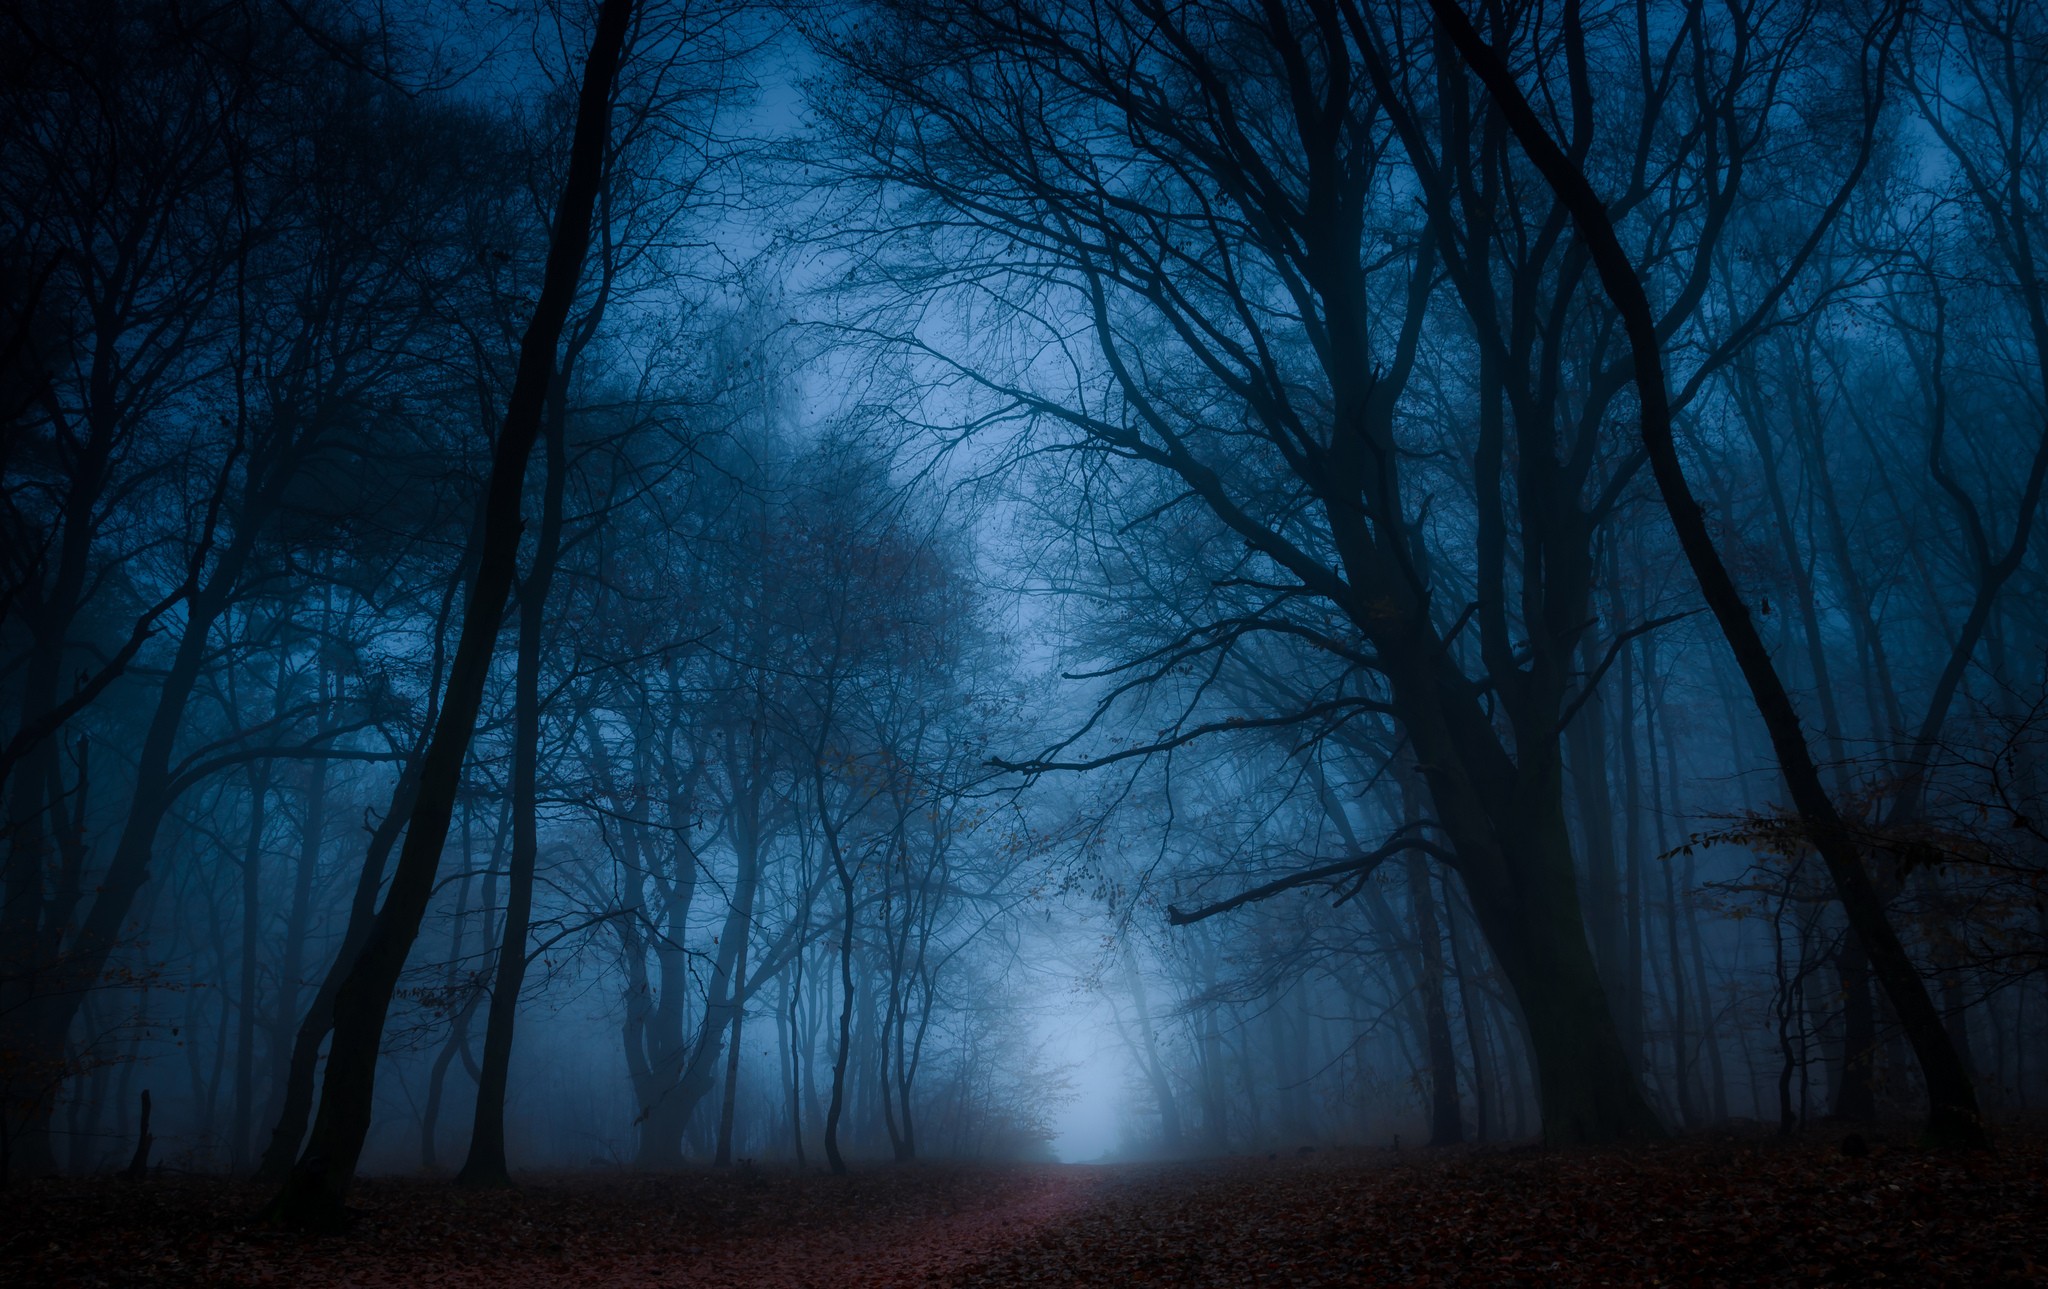 General 2048x1289 trees forest dark outdoors mist path fall blue nature creepy